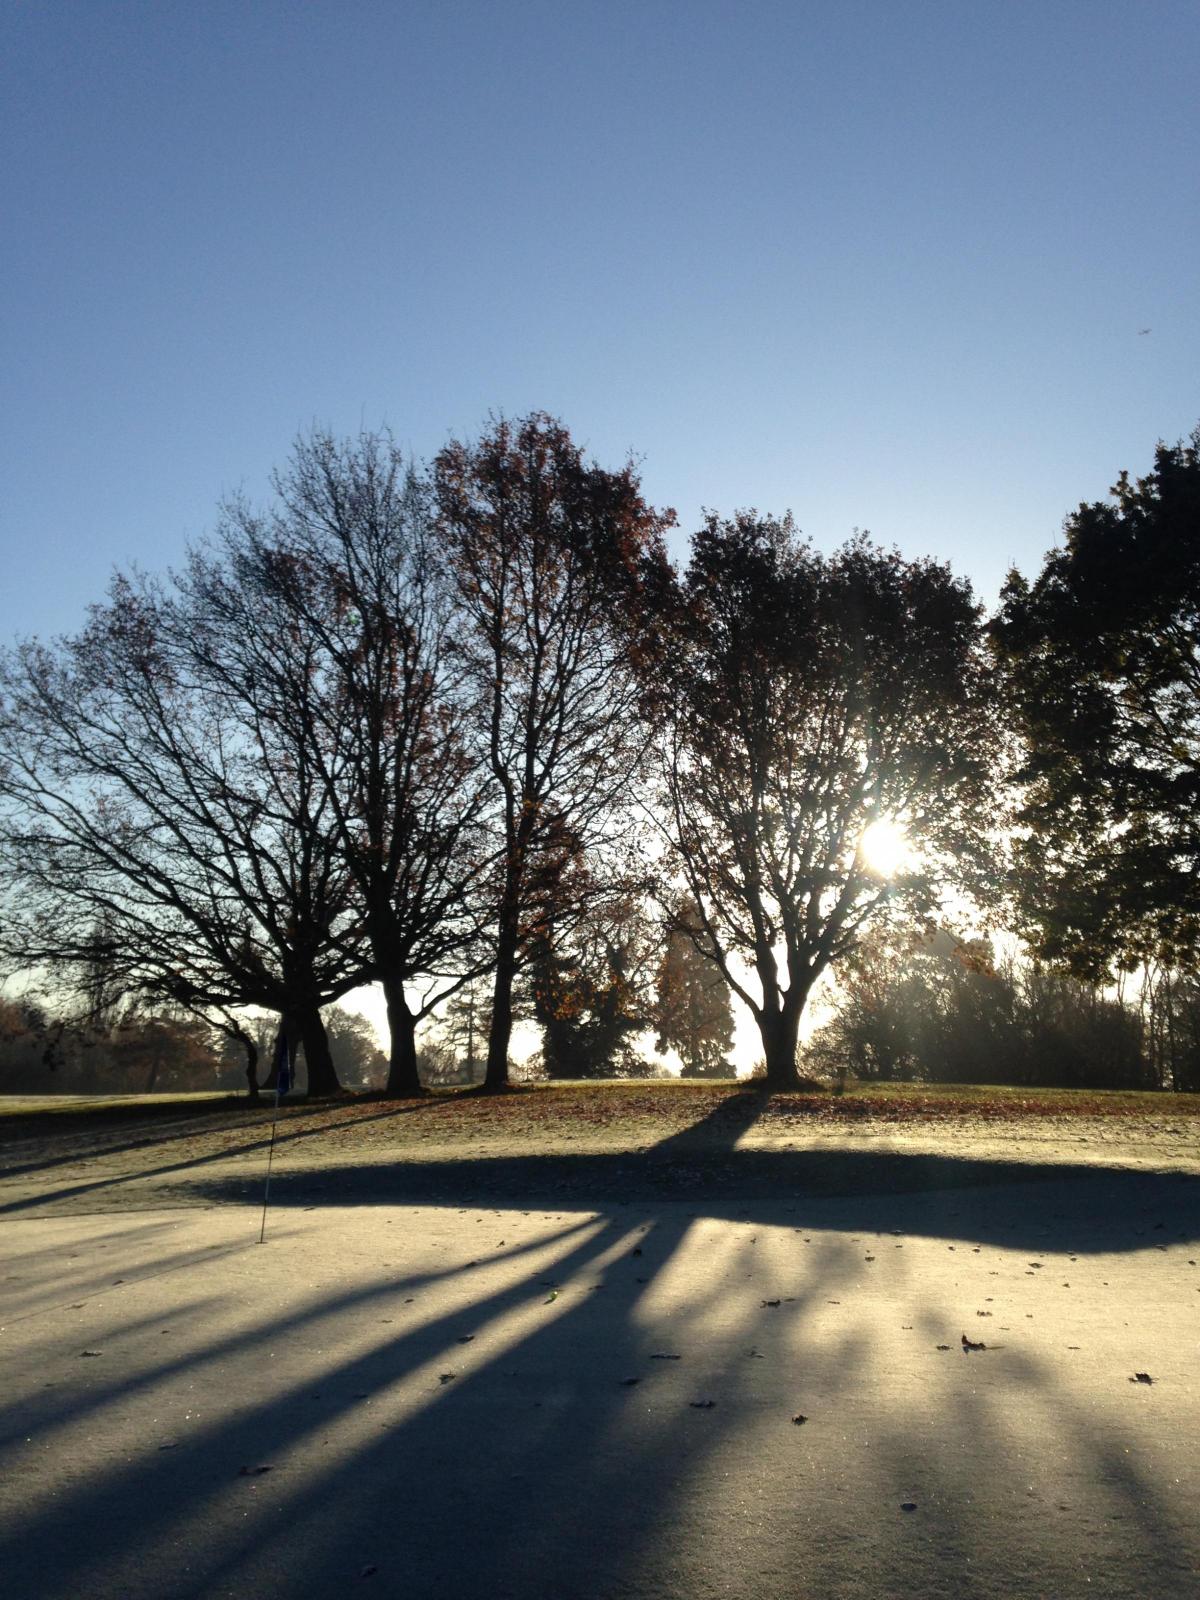 Adam Petitt took this photo of sunshine beaming through some woods during a game of golf. He said: "It was such a glorious morning and it really made me appreciate the beautiful surrounding we all have living in Surrey."